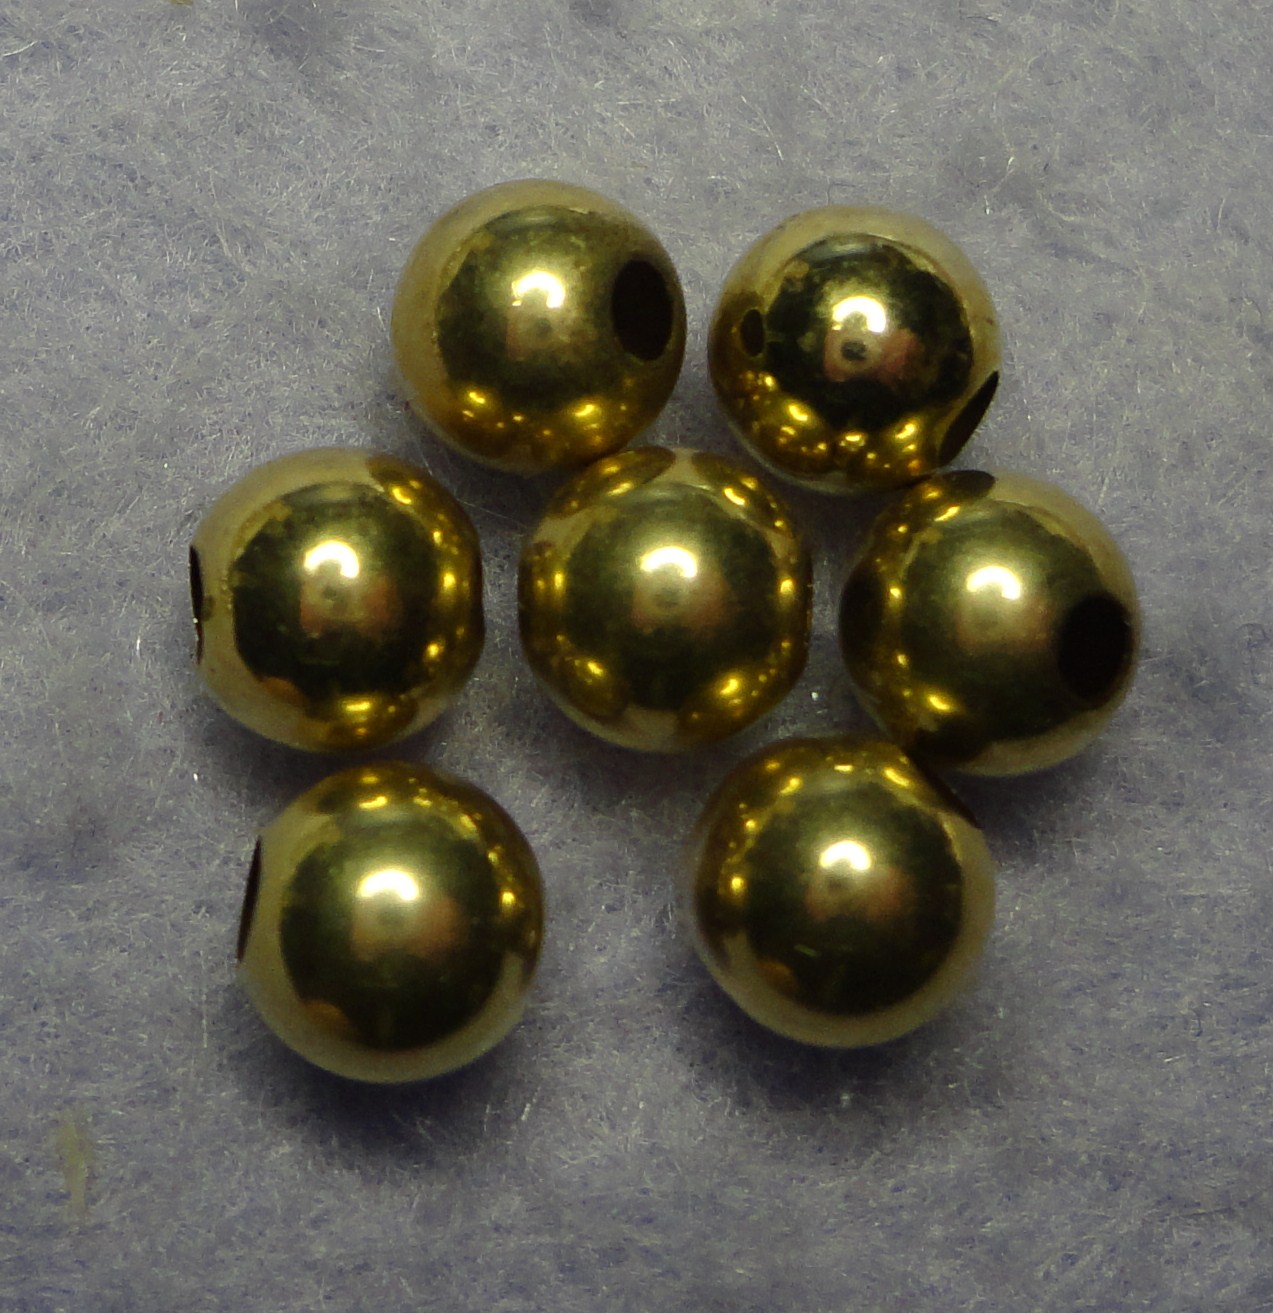 14 KT SOLID GOLD BEADS 5MM 6 PCS